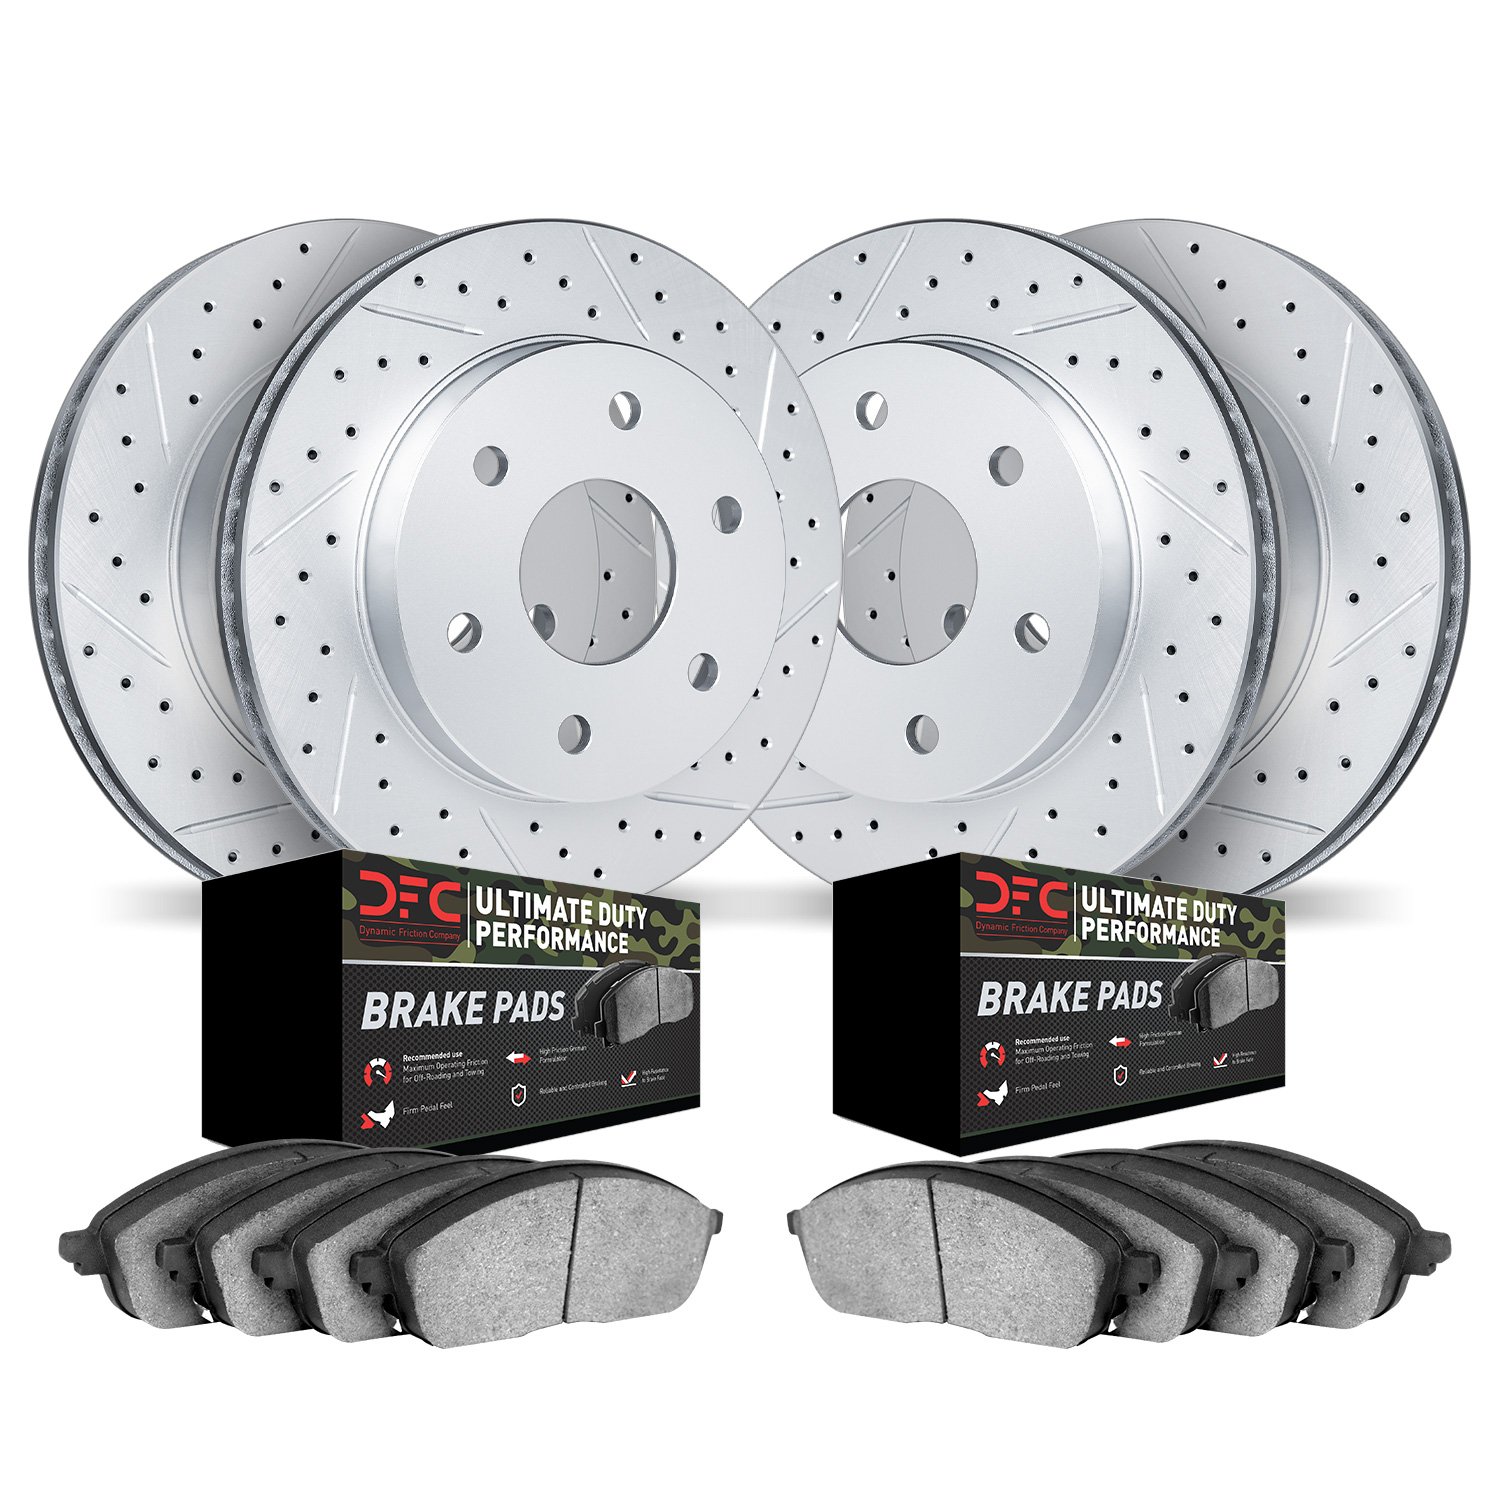 2404-47002 Geoperformance Drilled/Slotted Brake Rotors with Ultimate-Duty Brake Pads Kit, Fits Select GM, Position: Front and Re